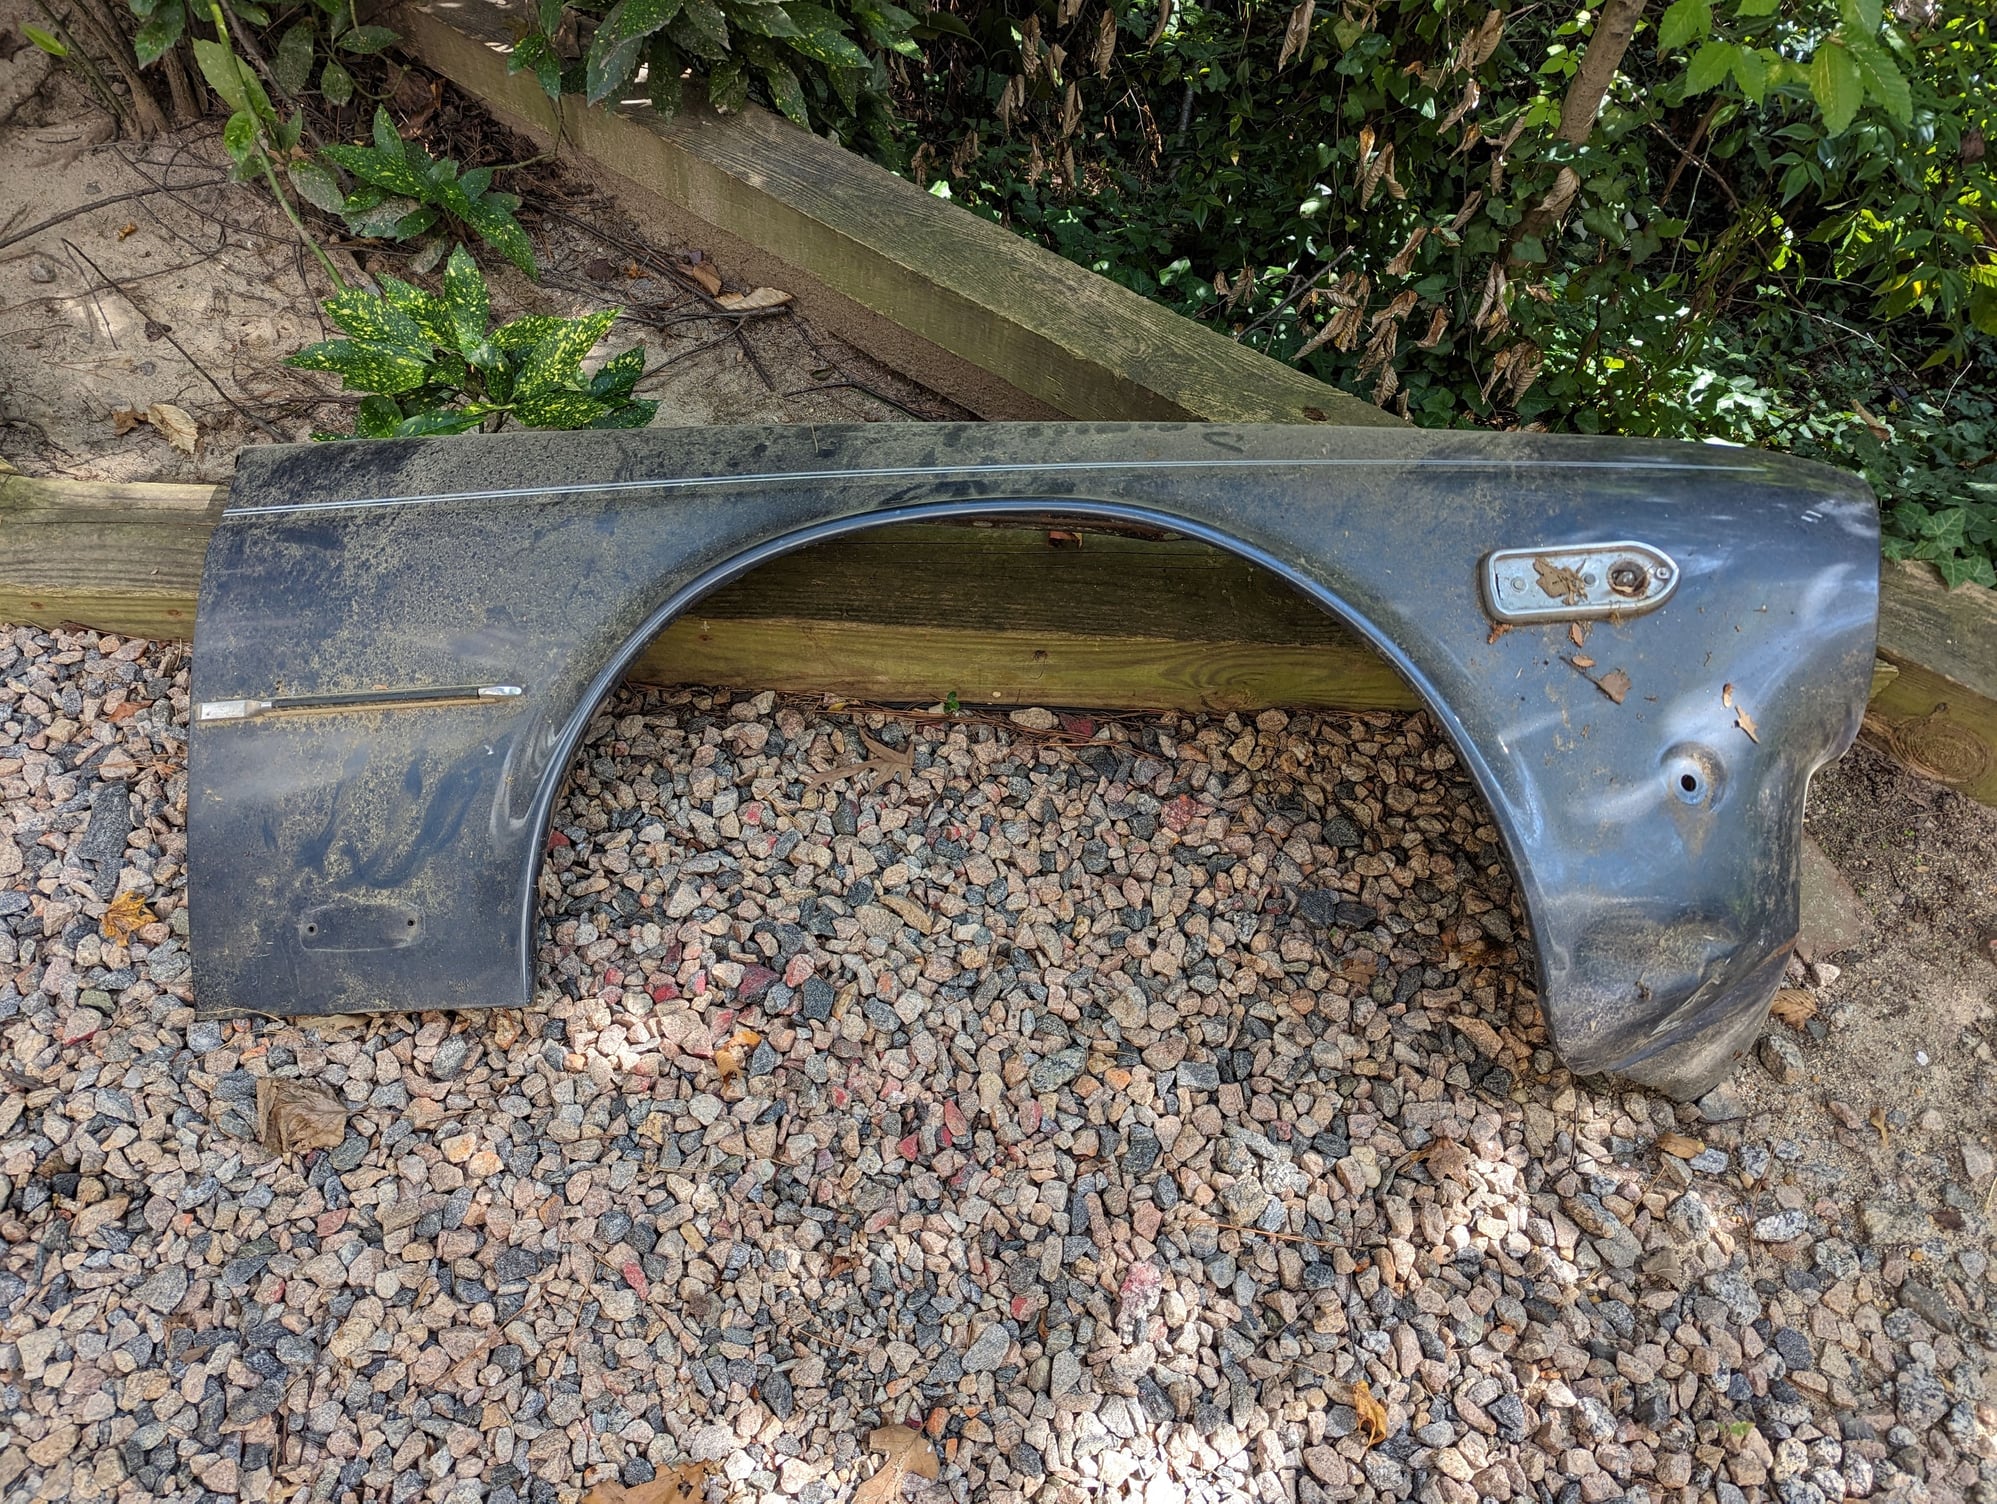 Exterior Body Parts - SIII front right quarter panel - FREE! - Used - 1979 to 1987 Jaguar XJ6 - Raleigh, NC 27612, United States